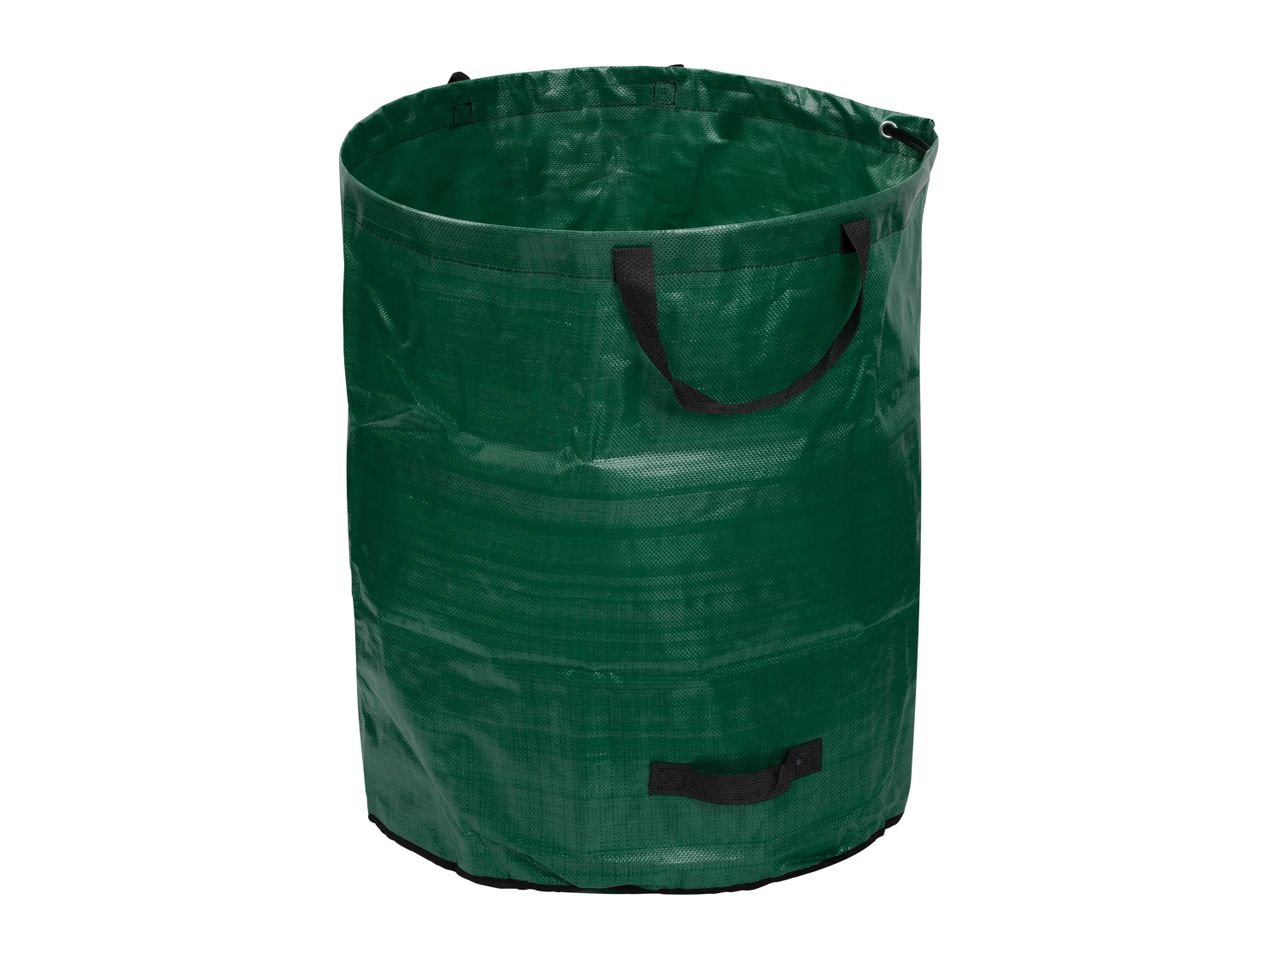 Go to full screen view: Garden Waste Bag - Image 1